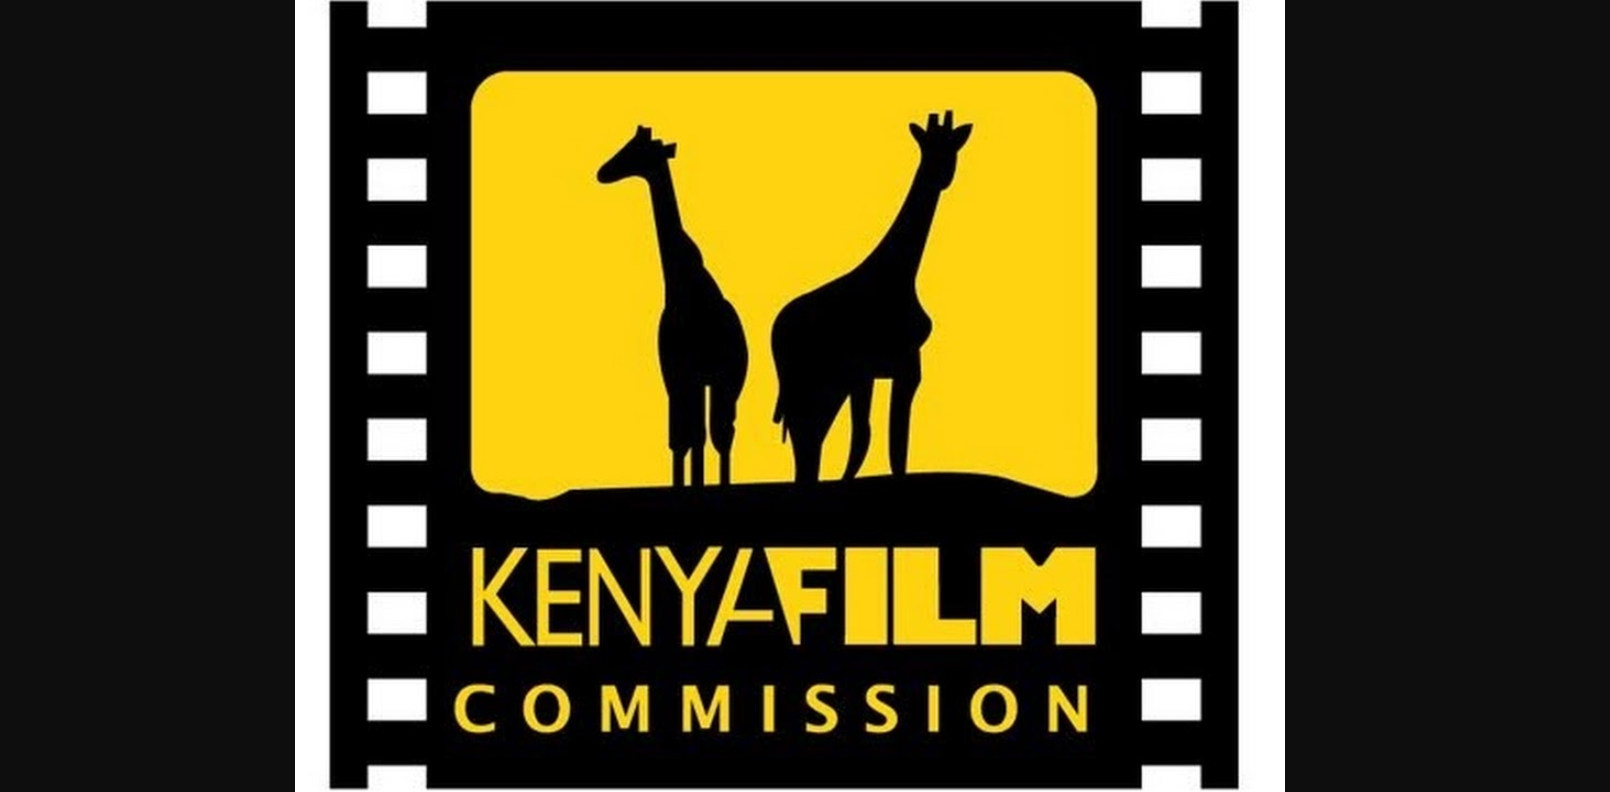 “We Watch Kenyan” initiative launched in an effort to promote Film content in Kenya